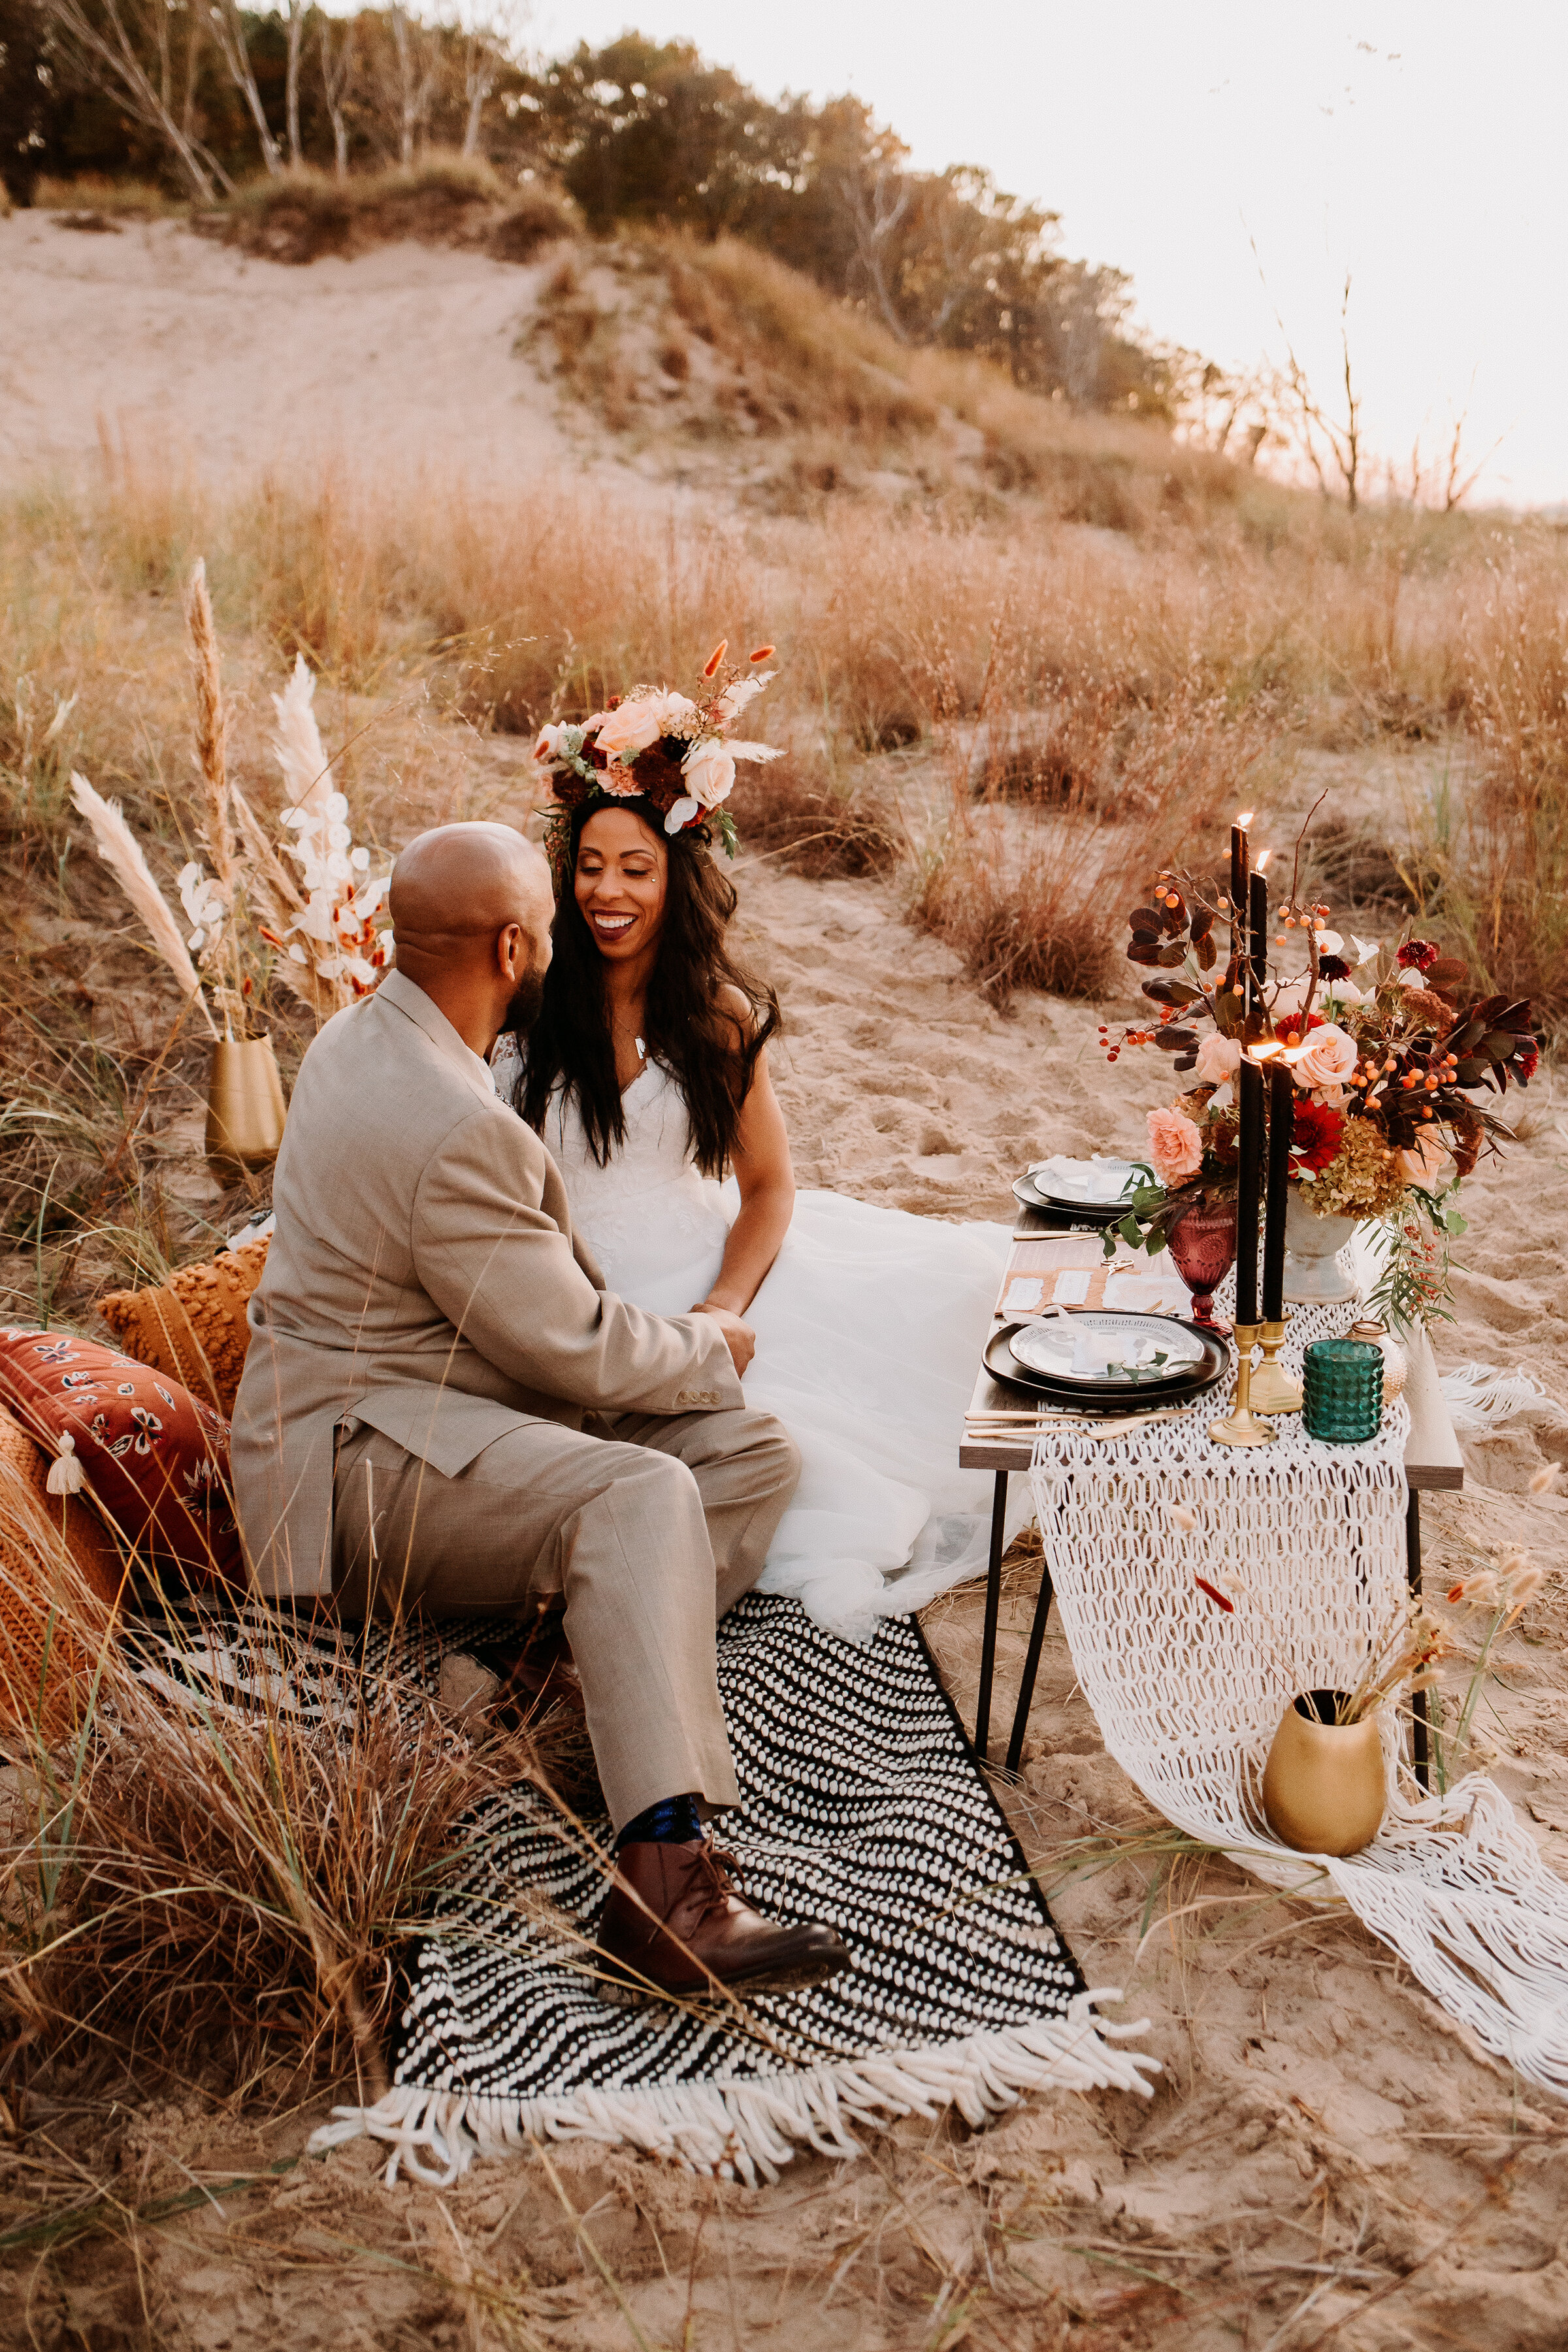  Take a peek at our bohemian-styled beach shoot on the shores of Lake Michigan near Chesterton, Indiana with adventurous boho themes like the floral headpiece this bride is wearing. midwest wedding boho vibes professional wedding photography beach el